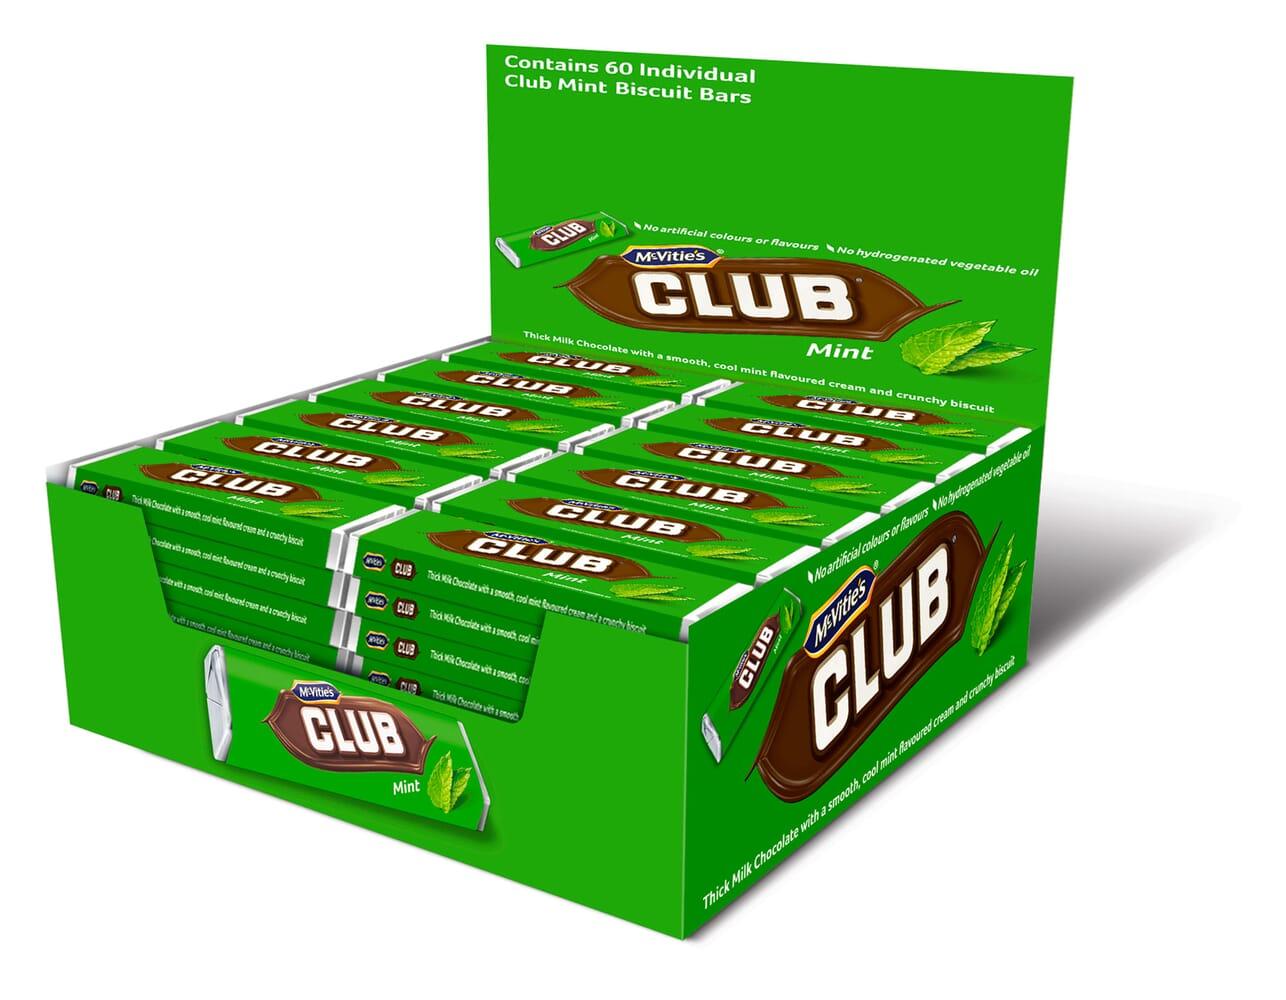 McVitie's Club Mint Biscuit Bars - Box of 60 Individually Wrapped - Vending Superstore